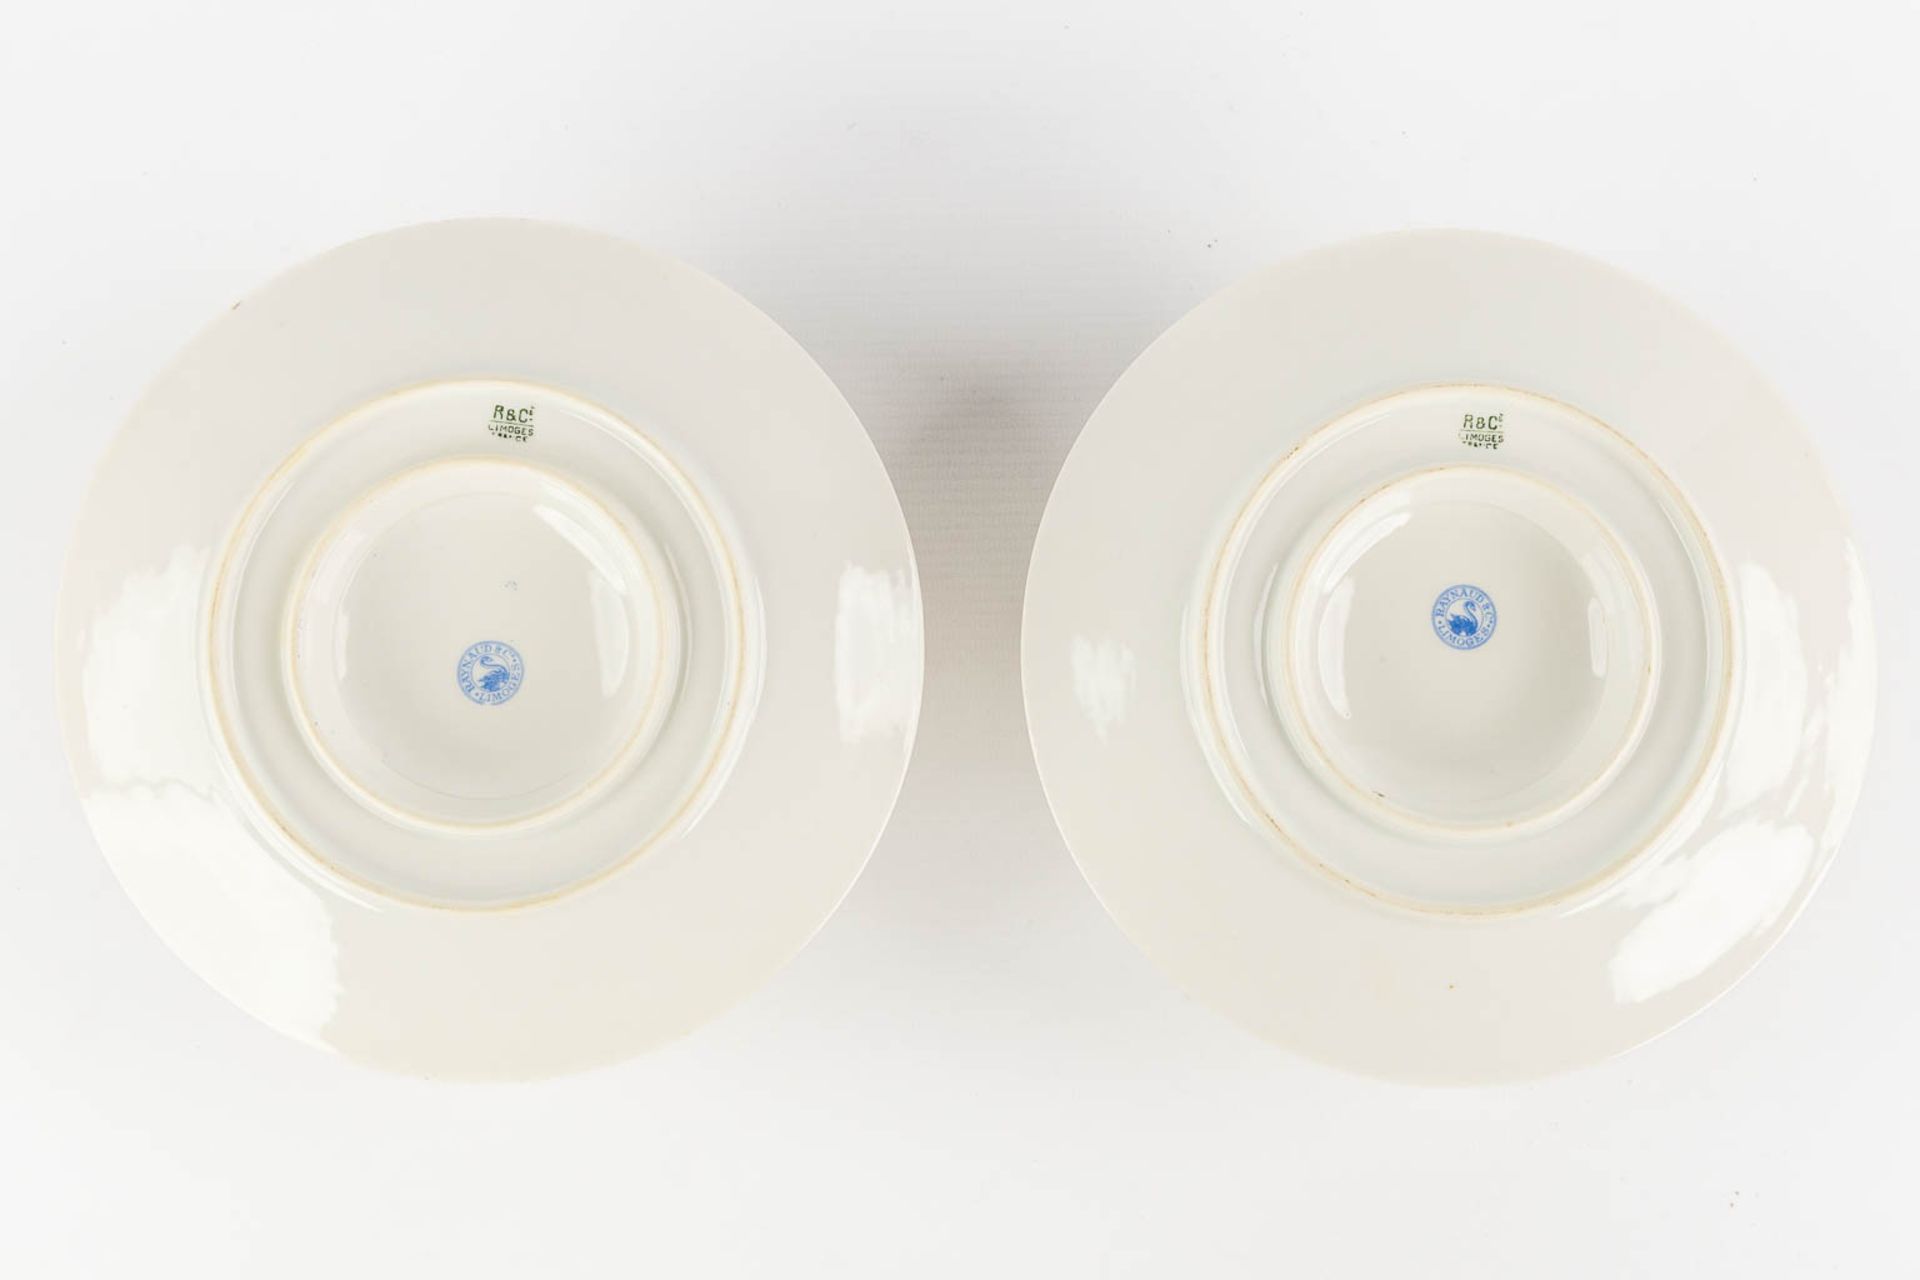 Raynaud, Limoges, a large dinner service. (L:25 x W:35 cm) - Image 13 of 16